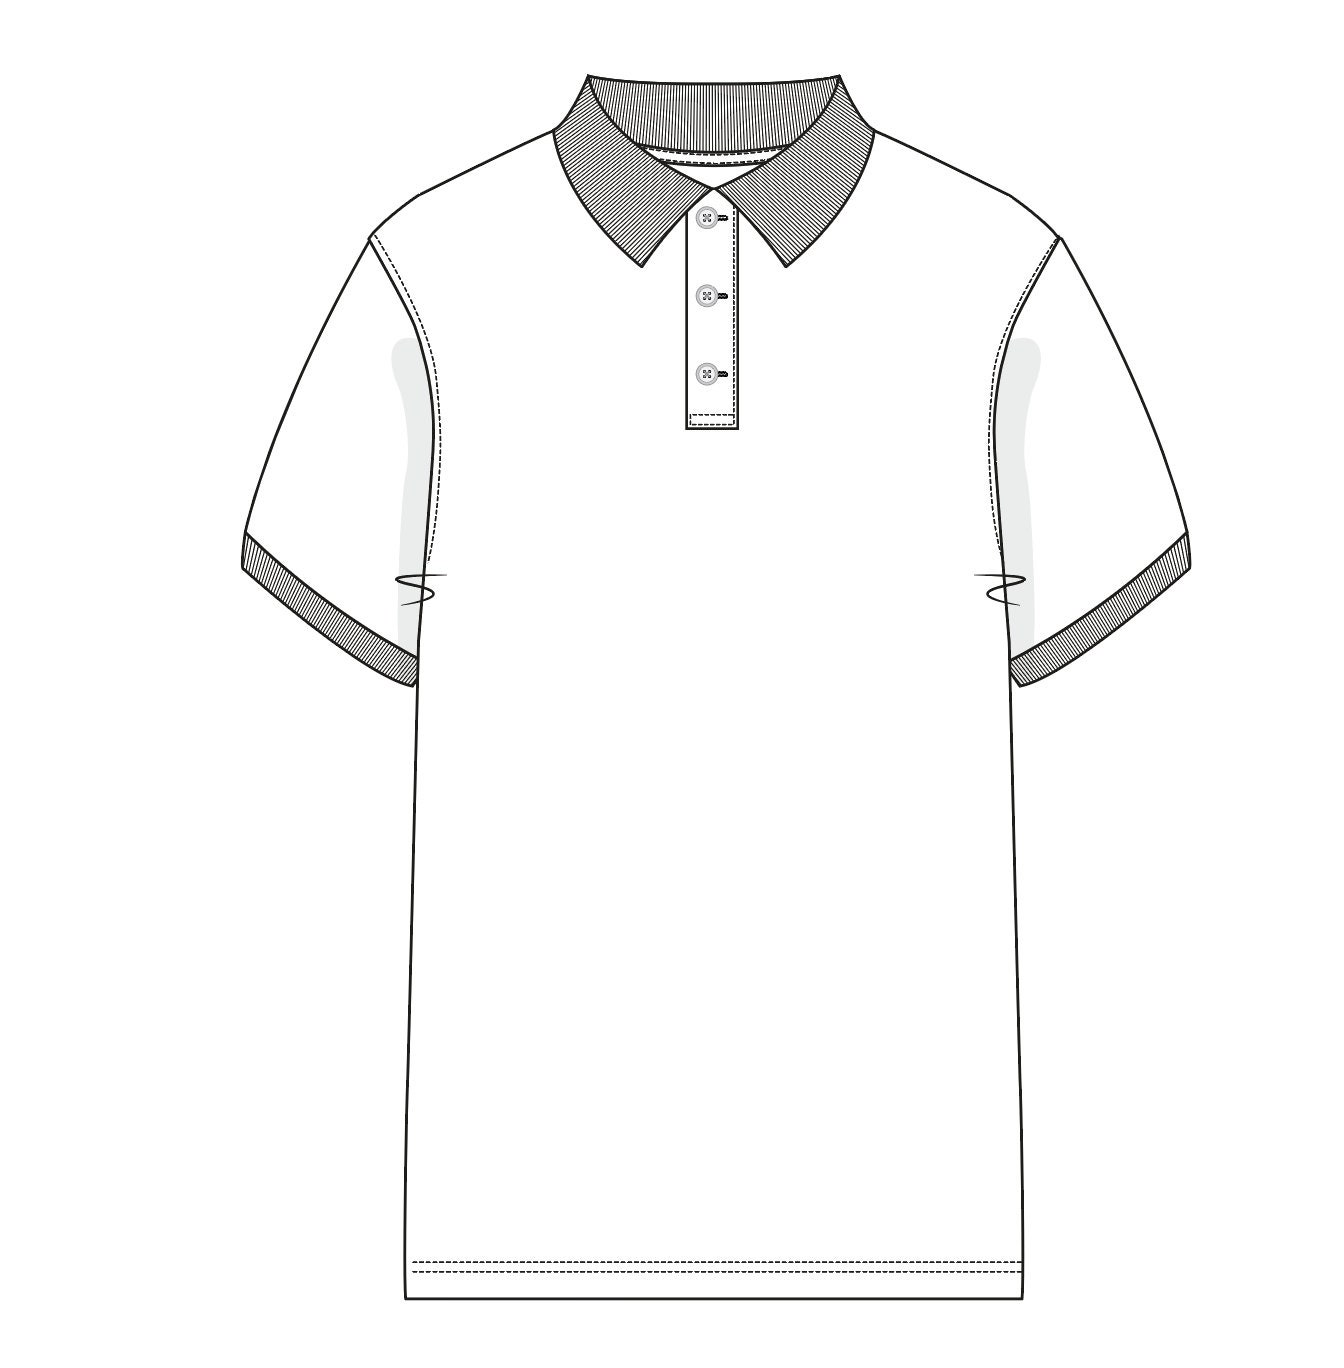 White Polo T-shirt Design Template. Front and Back Technical Sketch Unisex Polo  T Shirt Stock Illustration - Illustration of basic, female: 160501008